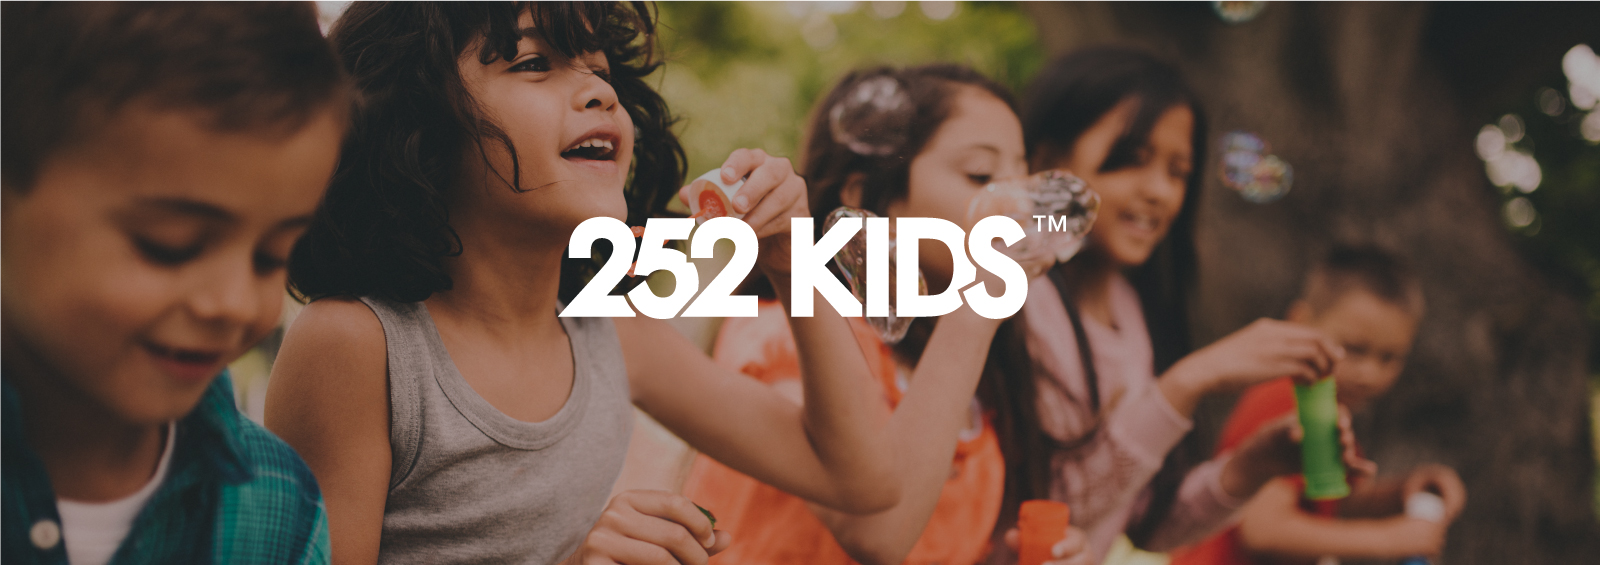 252 Kids logo, with 5 children happily playing with bubbles in the background